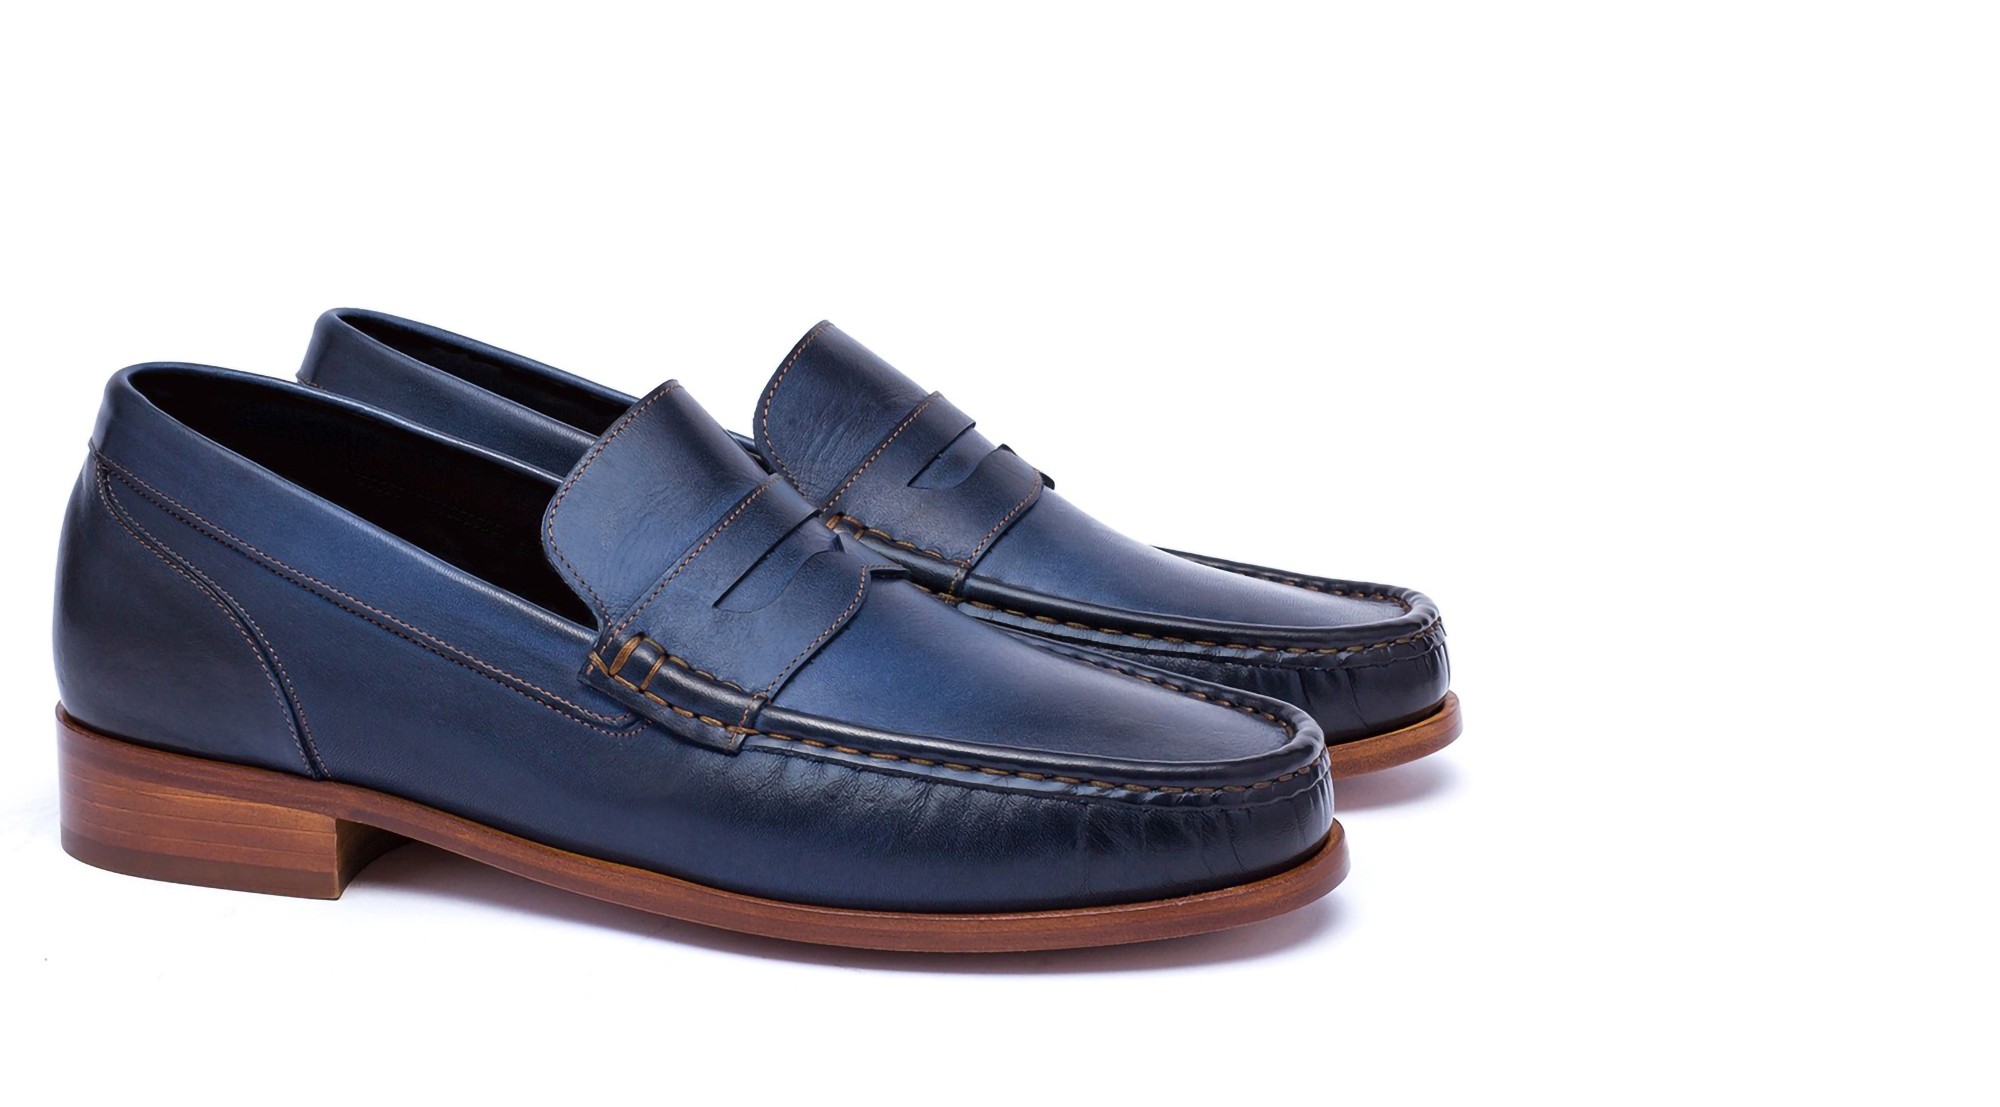 Adelaide - Elevator Loafers in Full Grain Leather up to 2.6 inches